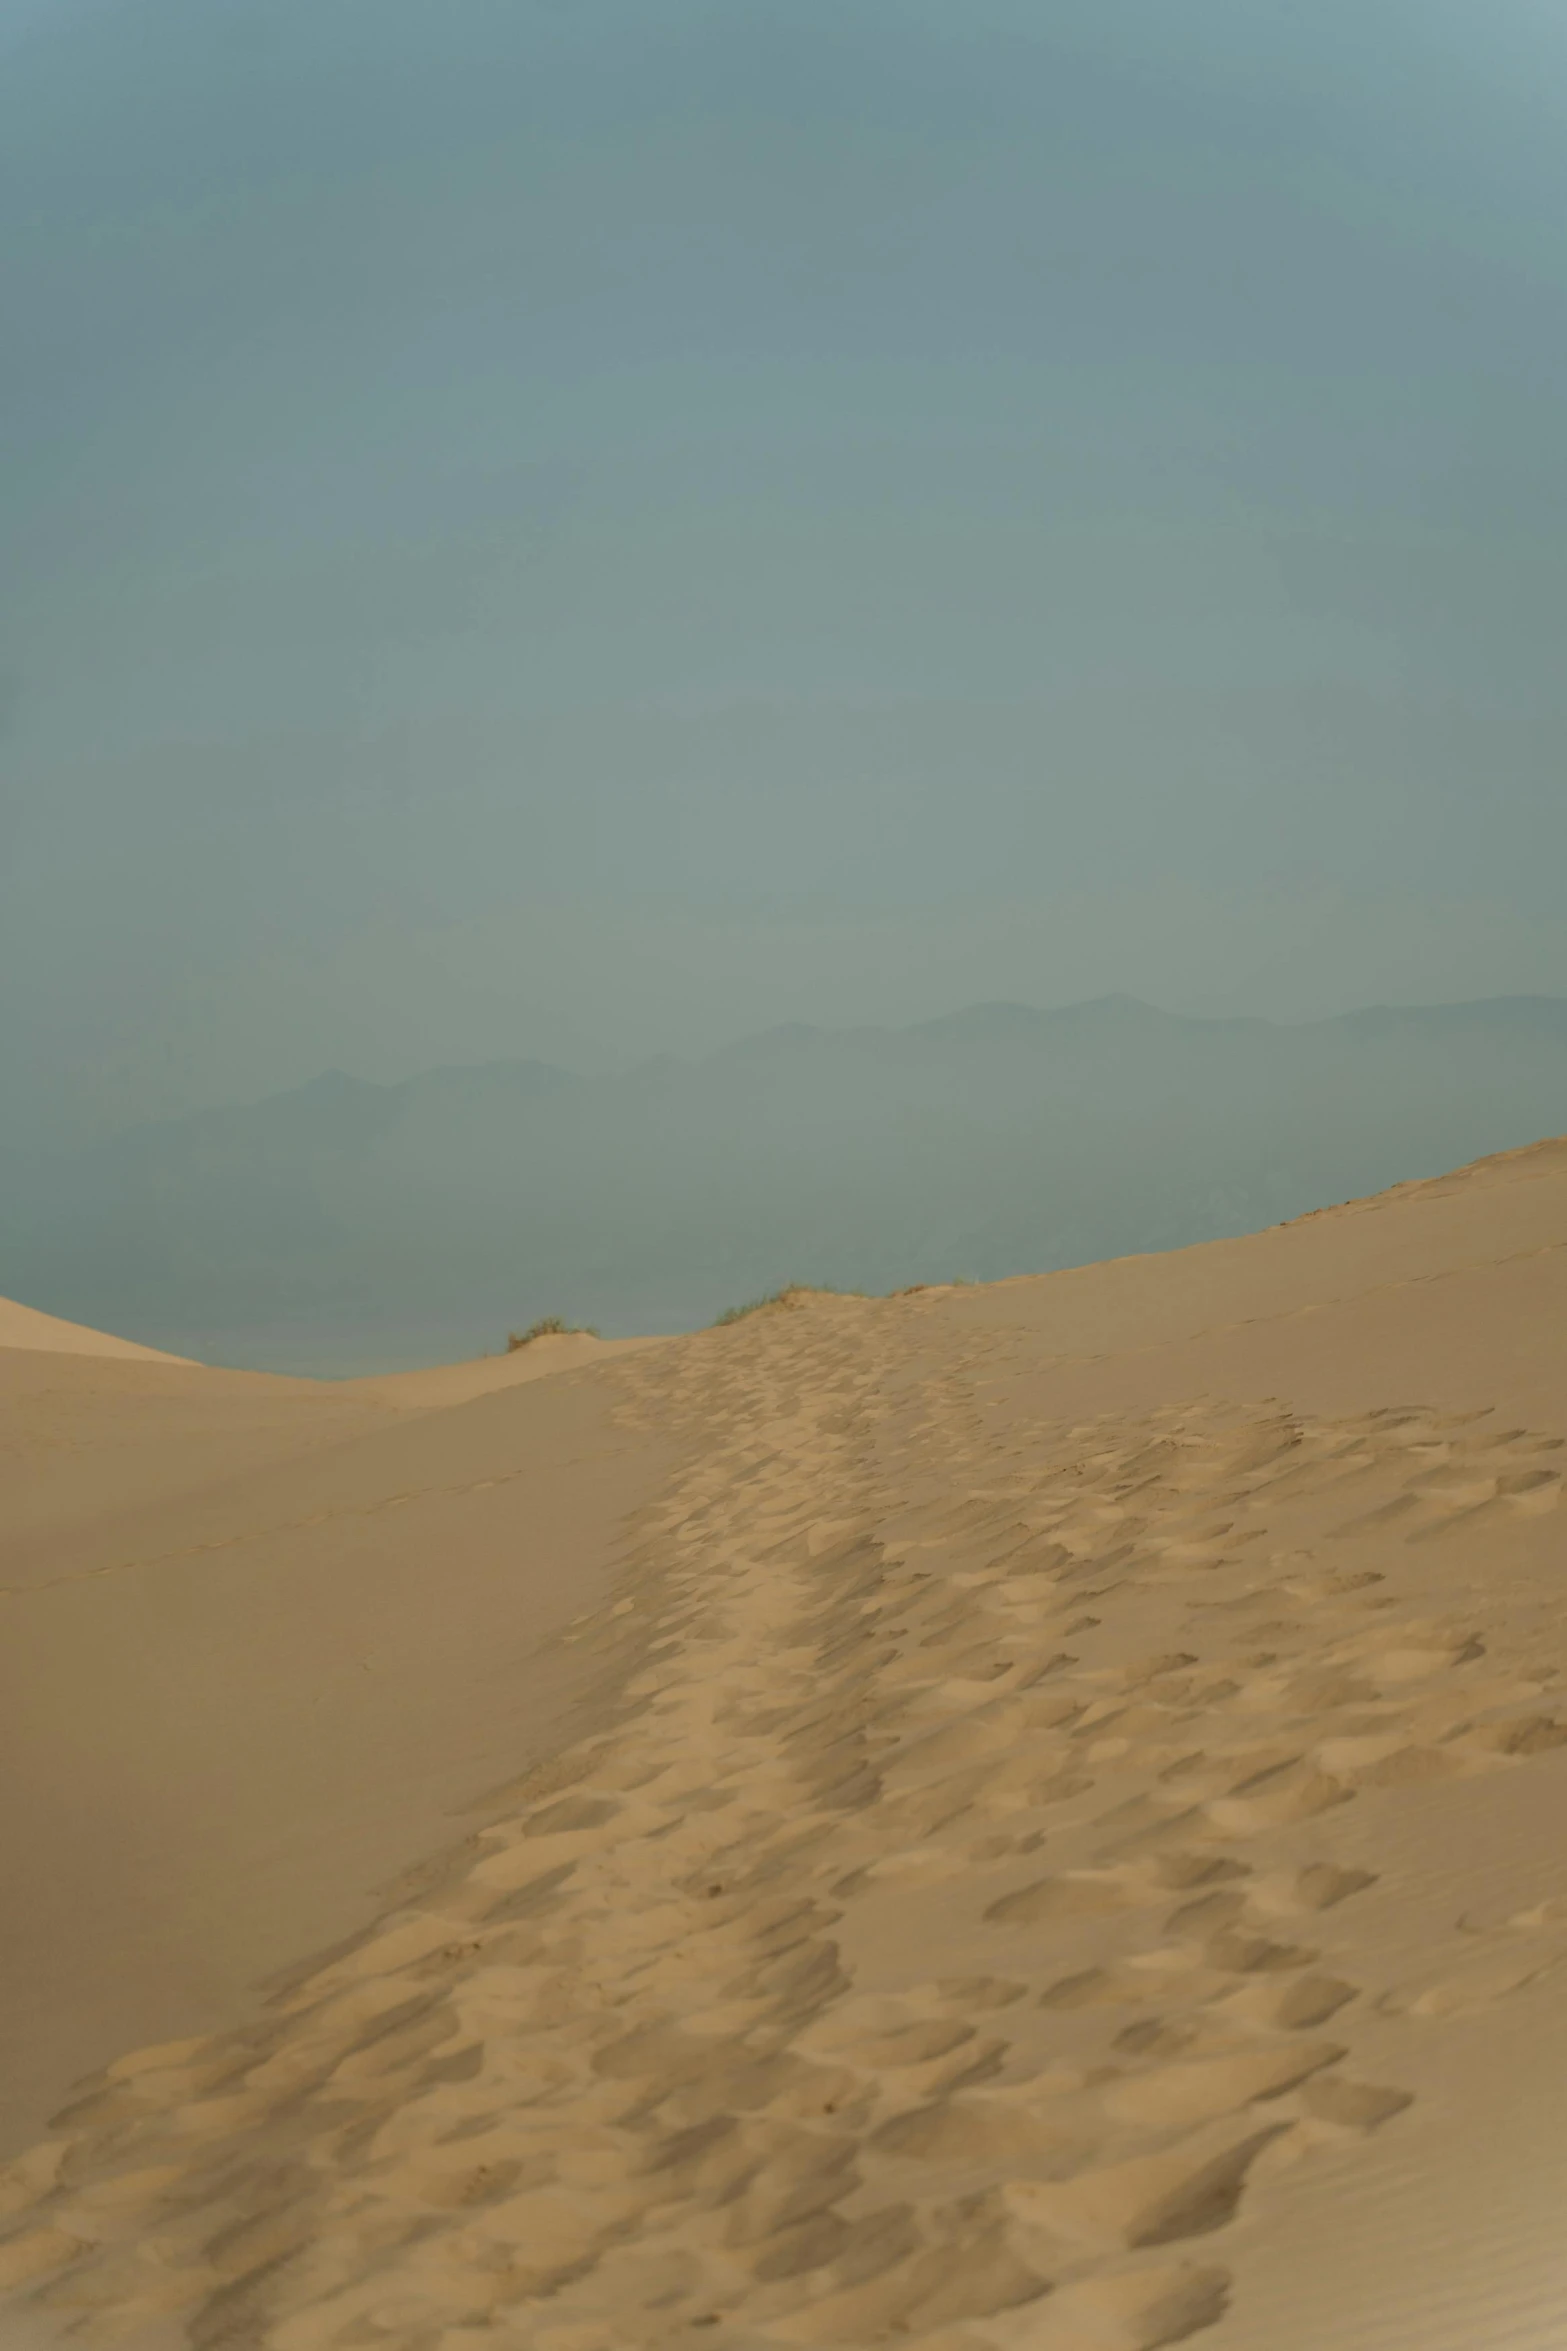 a man riding a surfboard on top of a sandy beach, a picture, inspired by Zhang Kechun, flickr, mingei, walking over sand dunes, 2 5 6 x 2 5 6 pixels, desert highway, an ancient path